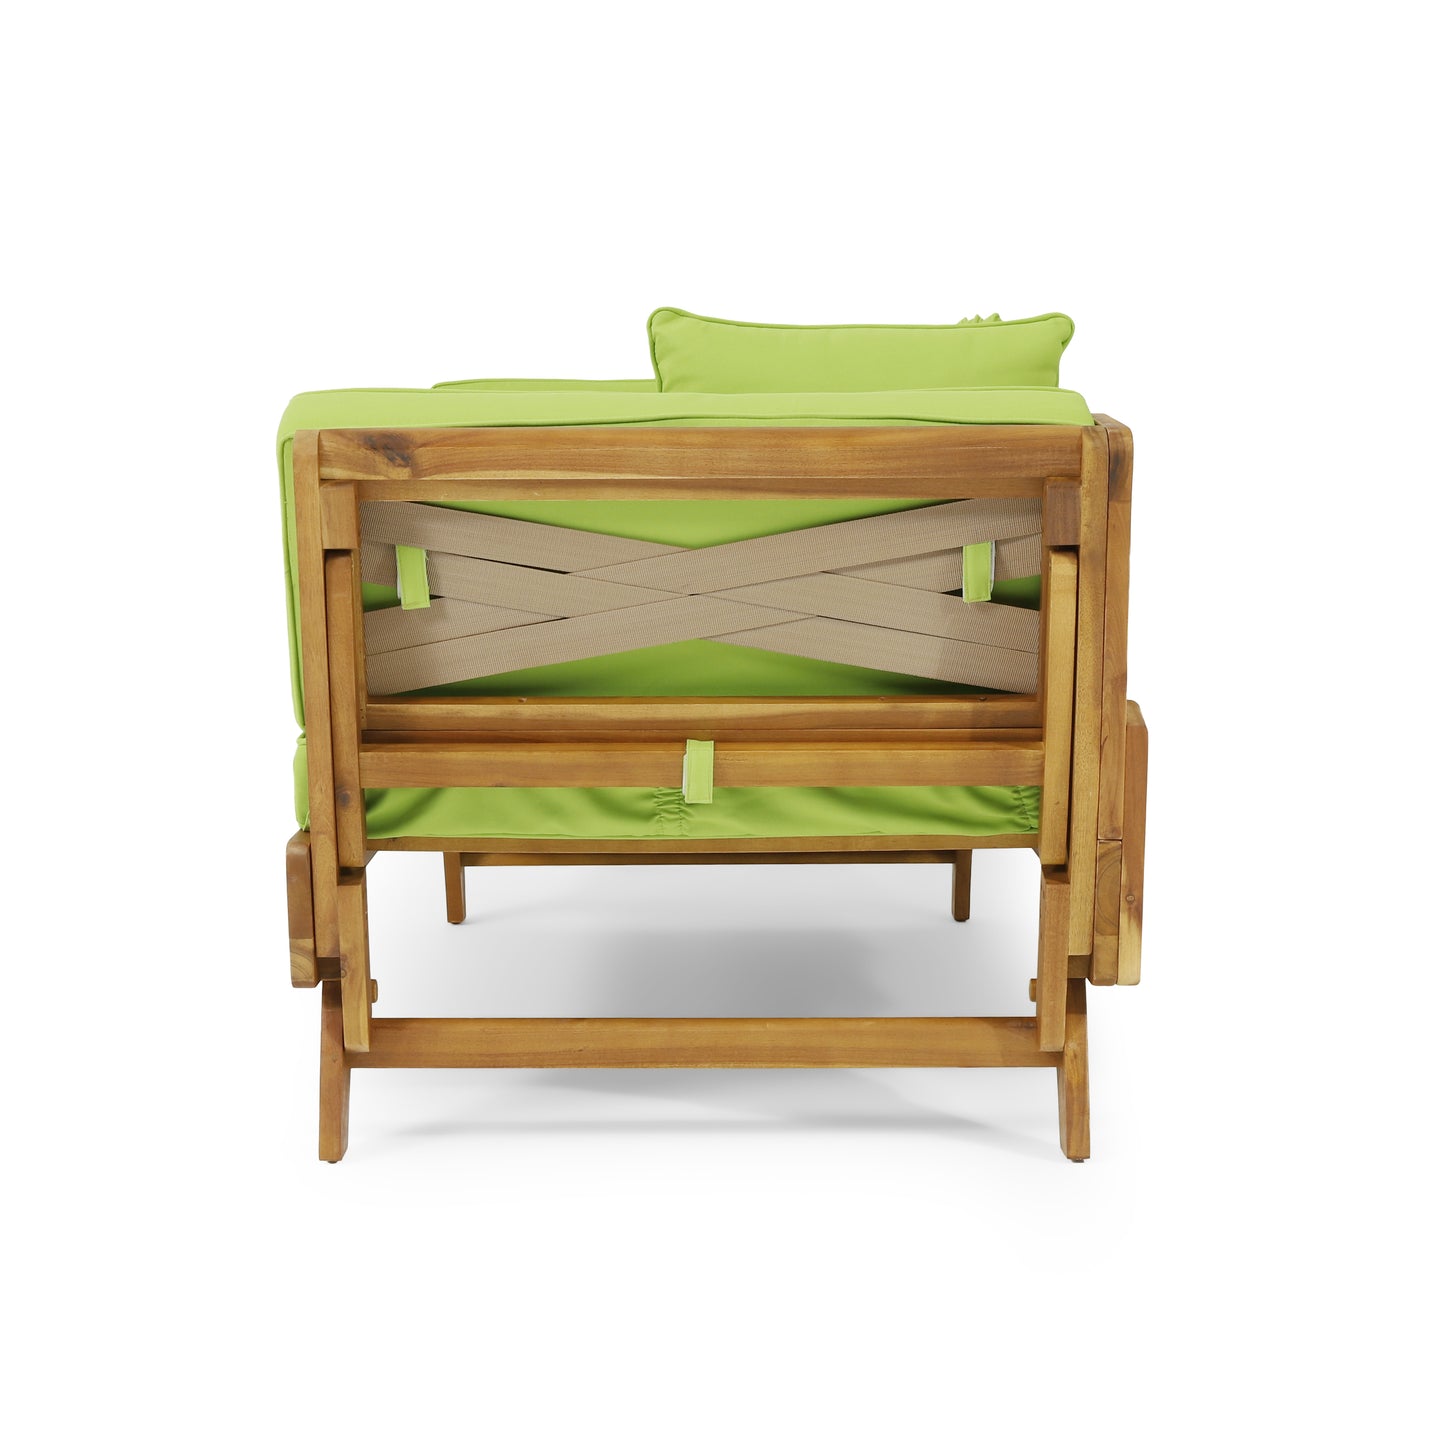 Oceanna Outdoor Acacia Wood and Rope Expandable Daybed with Cushions